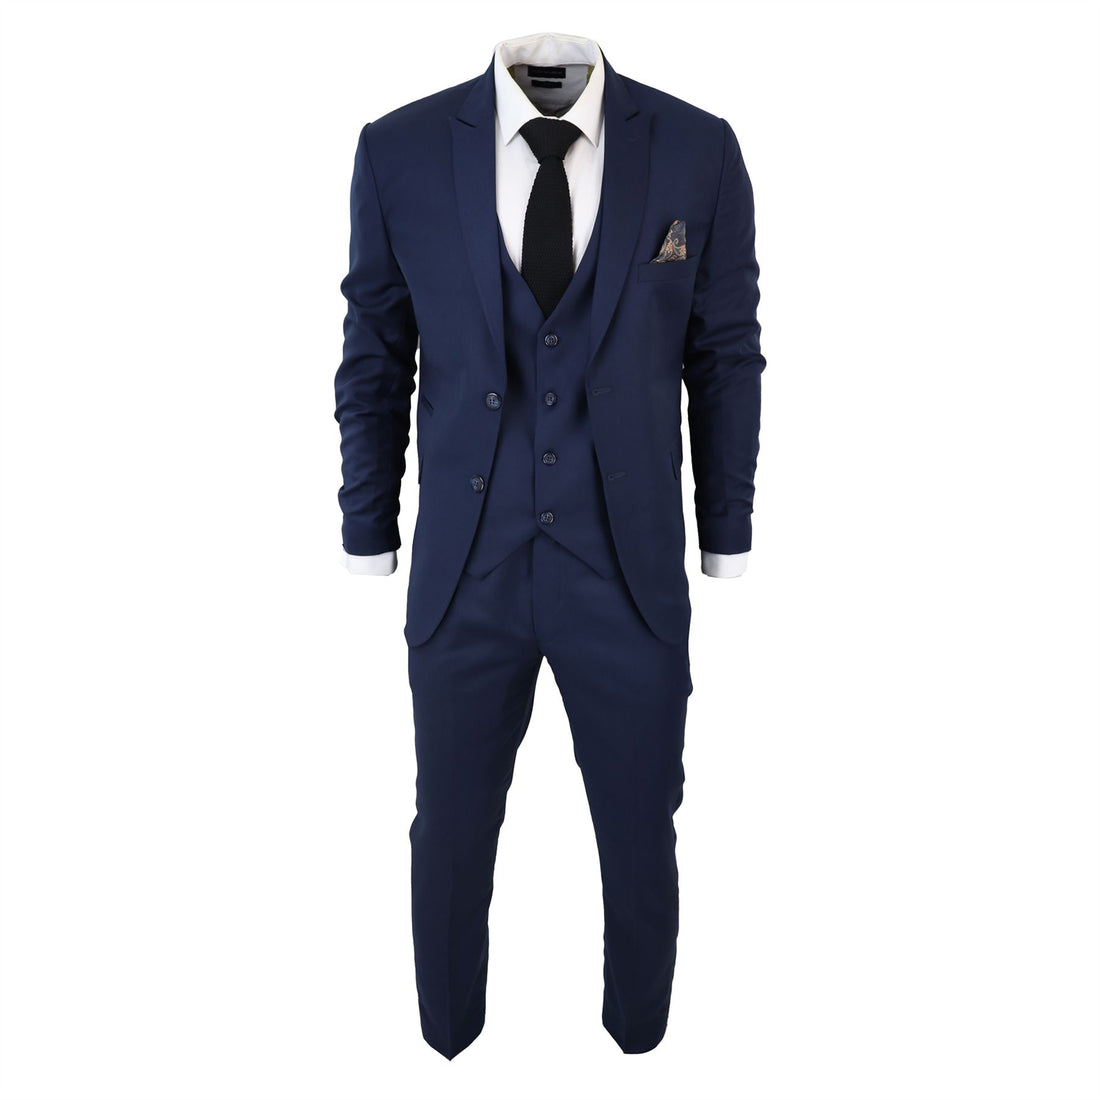 Men's Classic Navy Blue Suit 3 Piece Tailored Fit Vintage Office Wedding Prom